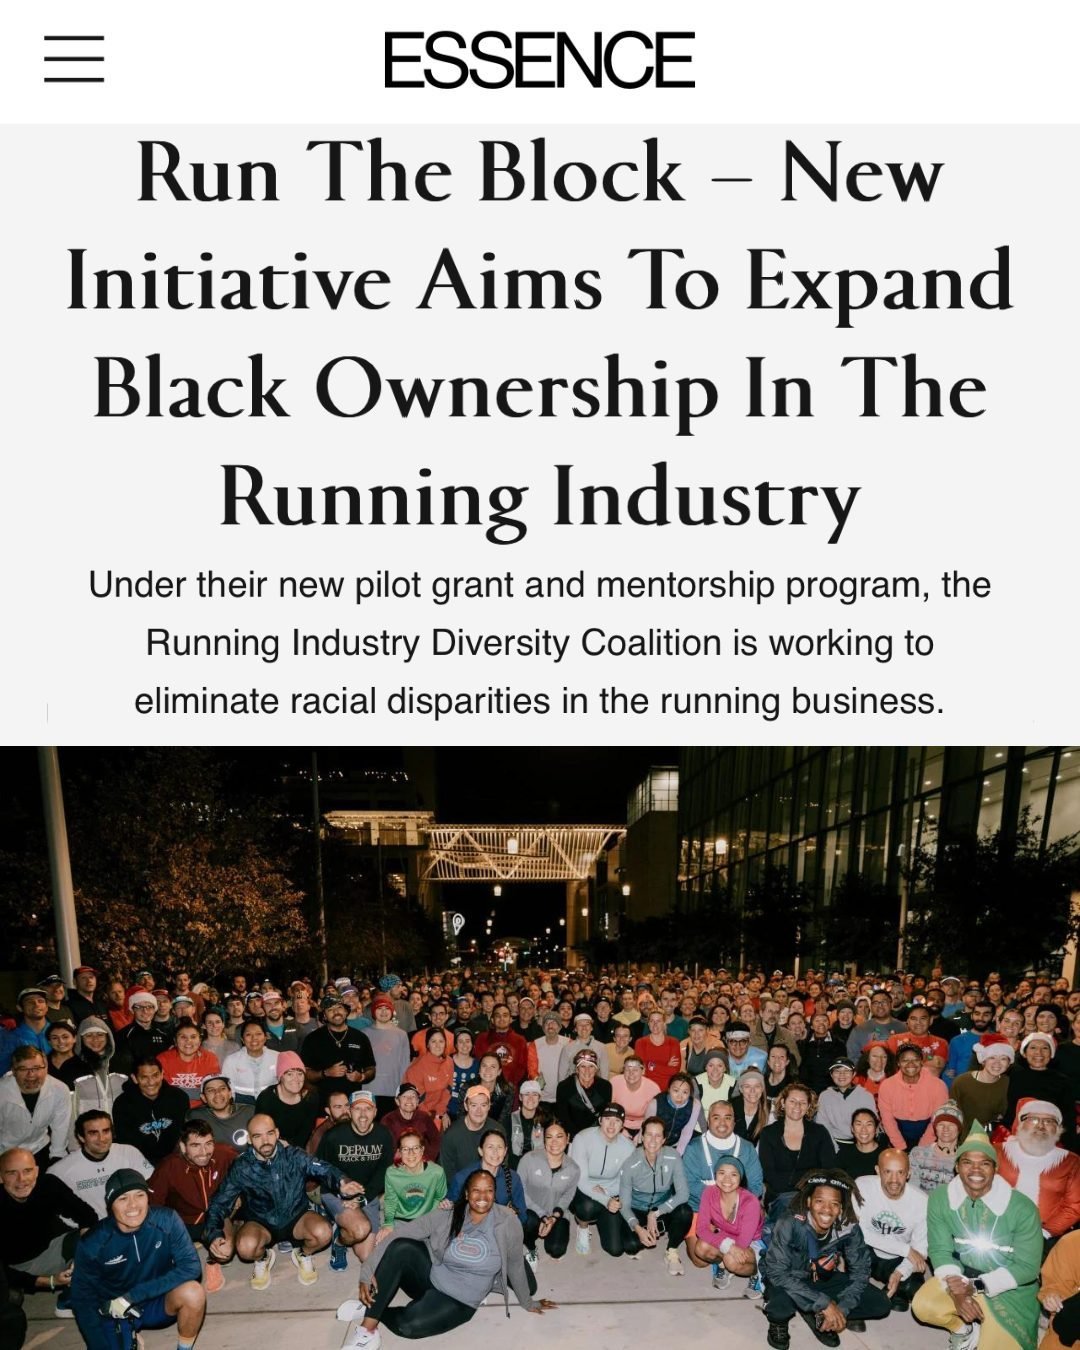 This is big.
Real big.
WE IN ESSENCE Y&rsquo;ALL! 🎉

It was important for us to have platforms like Essence Magazine highlight RUN THE BLOCK and our organization. We are working to bring in more people into the running industry period (both working 